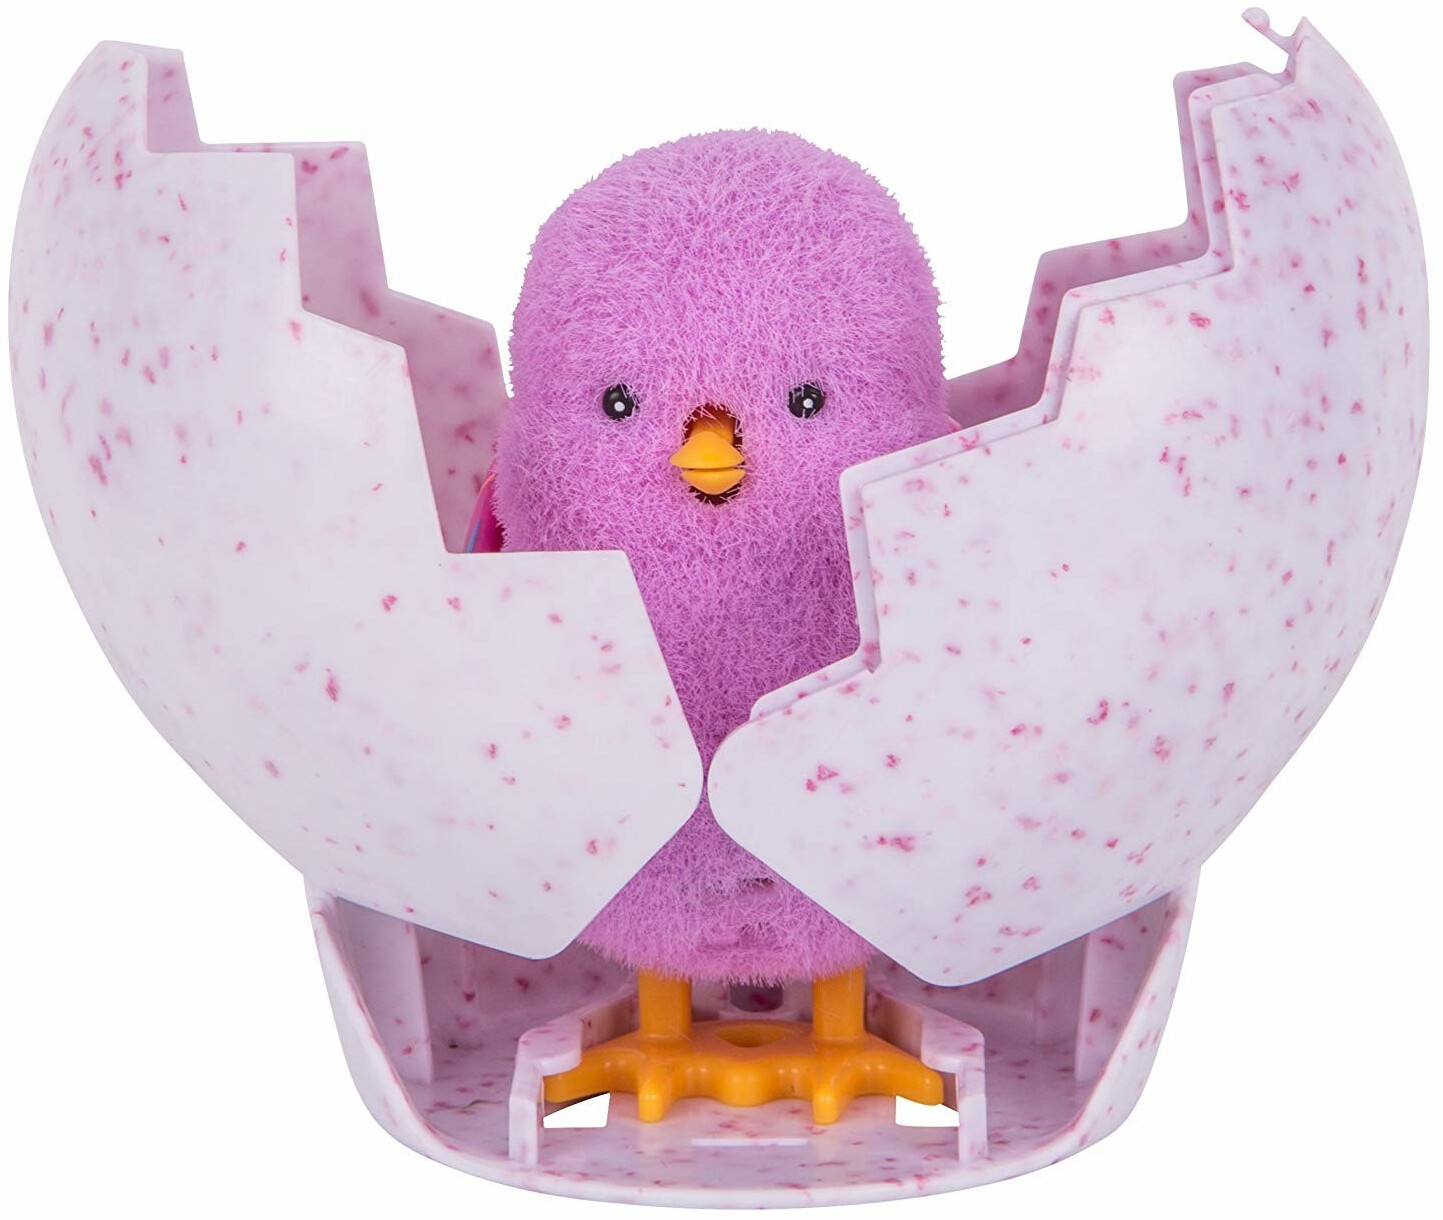 Buy Little Live Pets Surprise Chick from £18.49 (Today) – Best Deals on ...